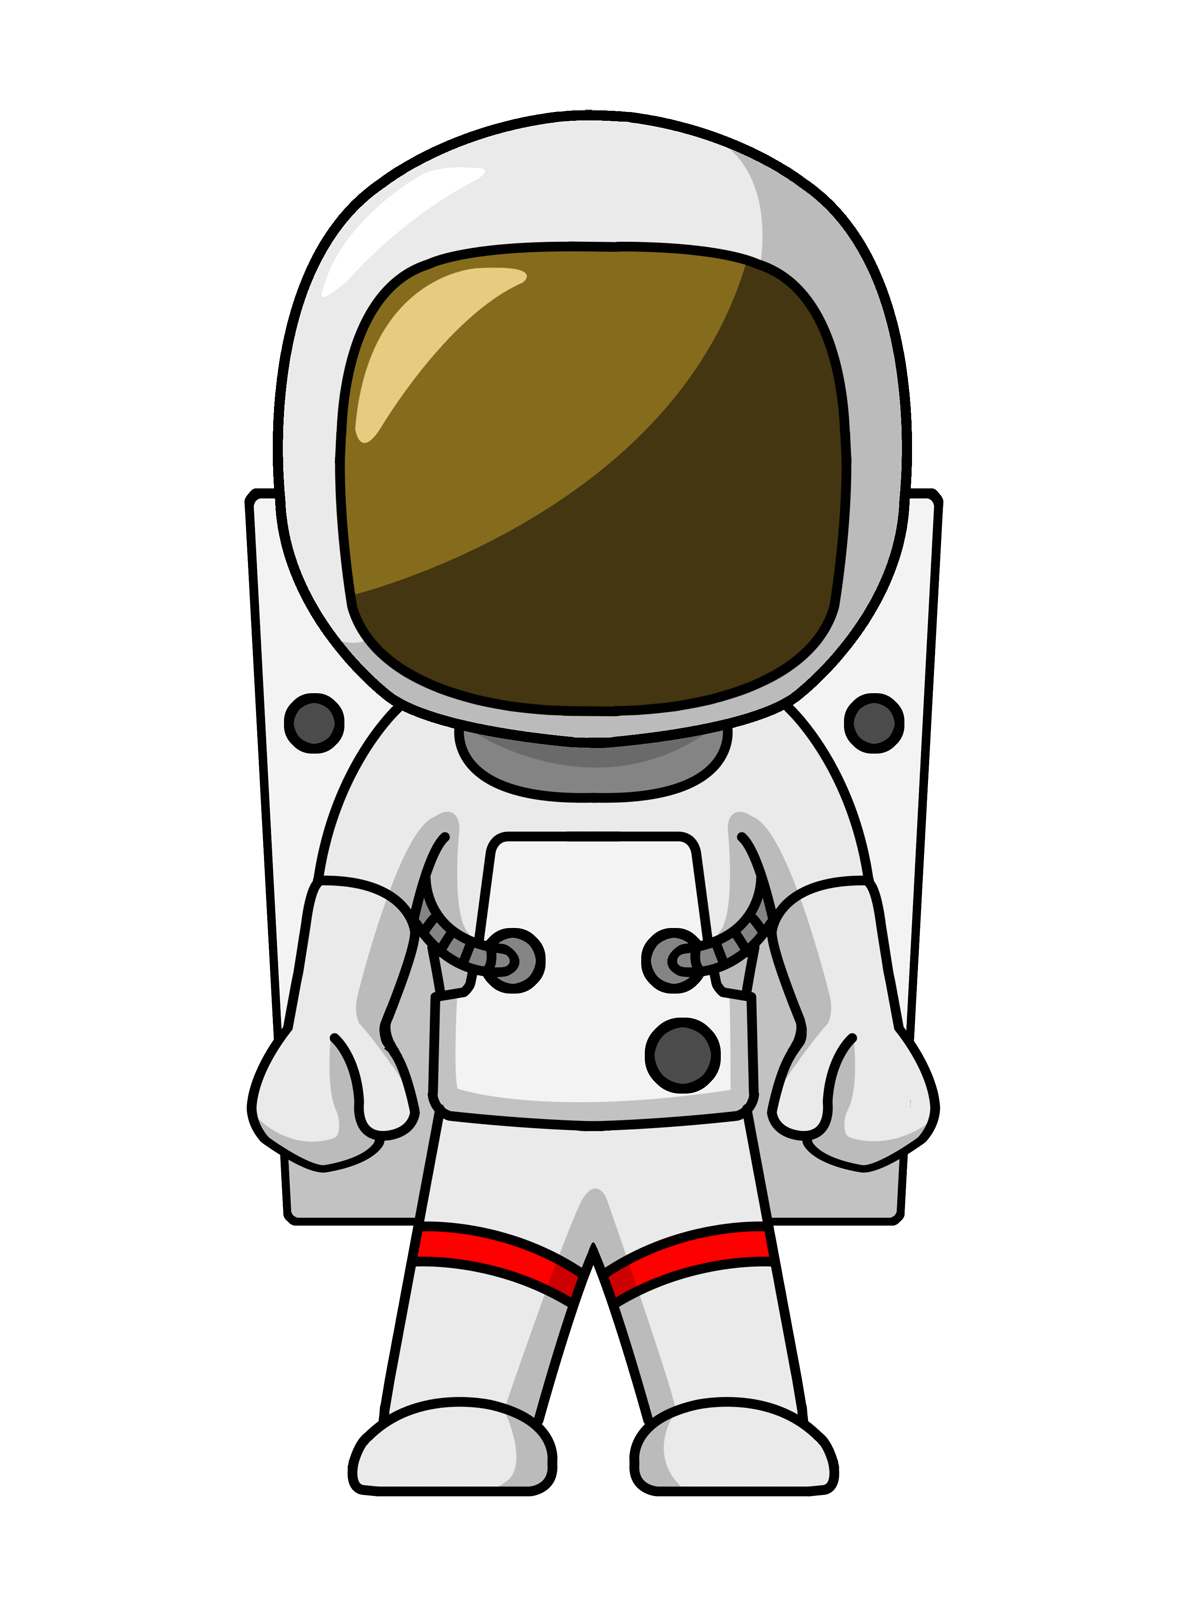 Astronaut Clip Art   Images   Free For Commercial Use